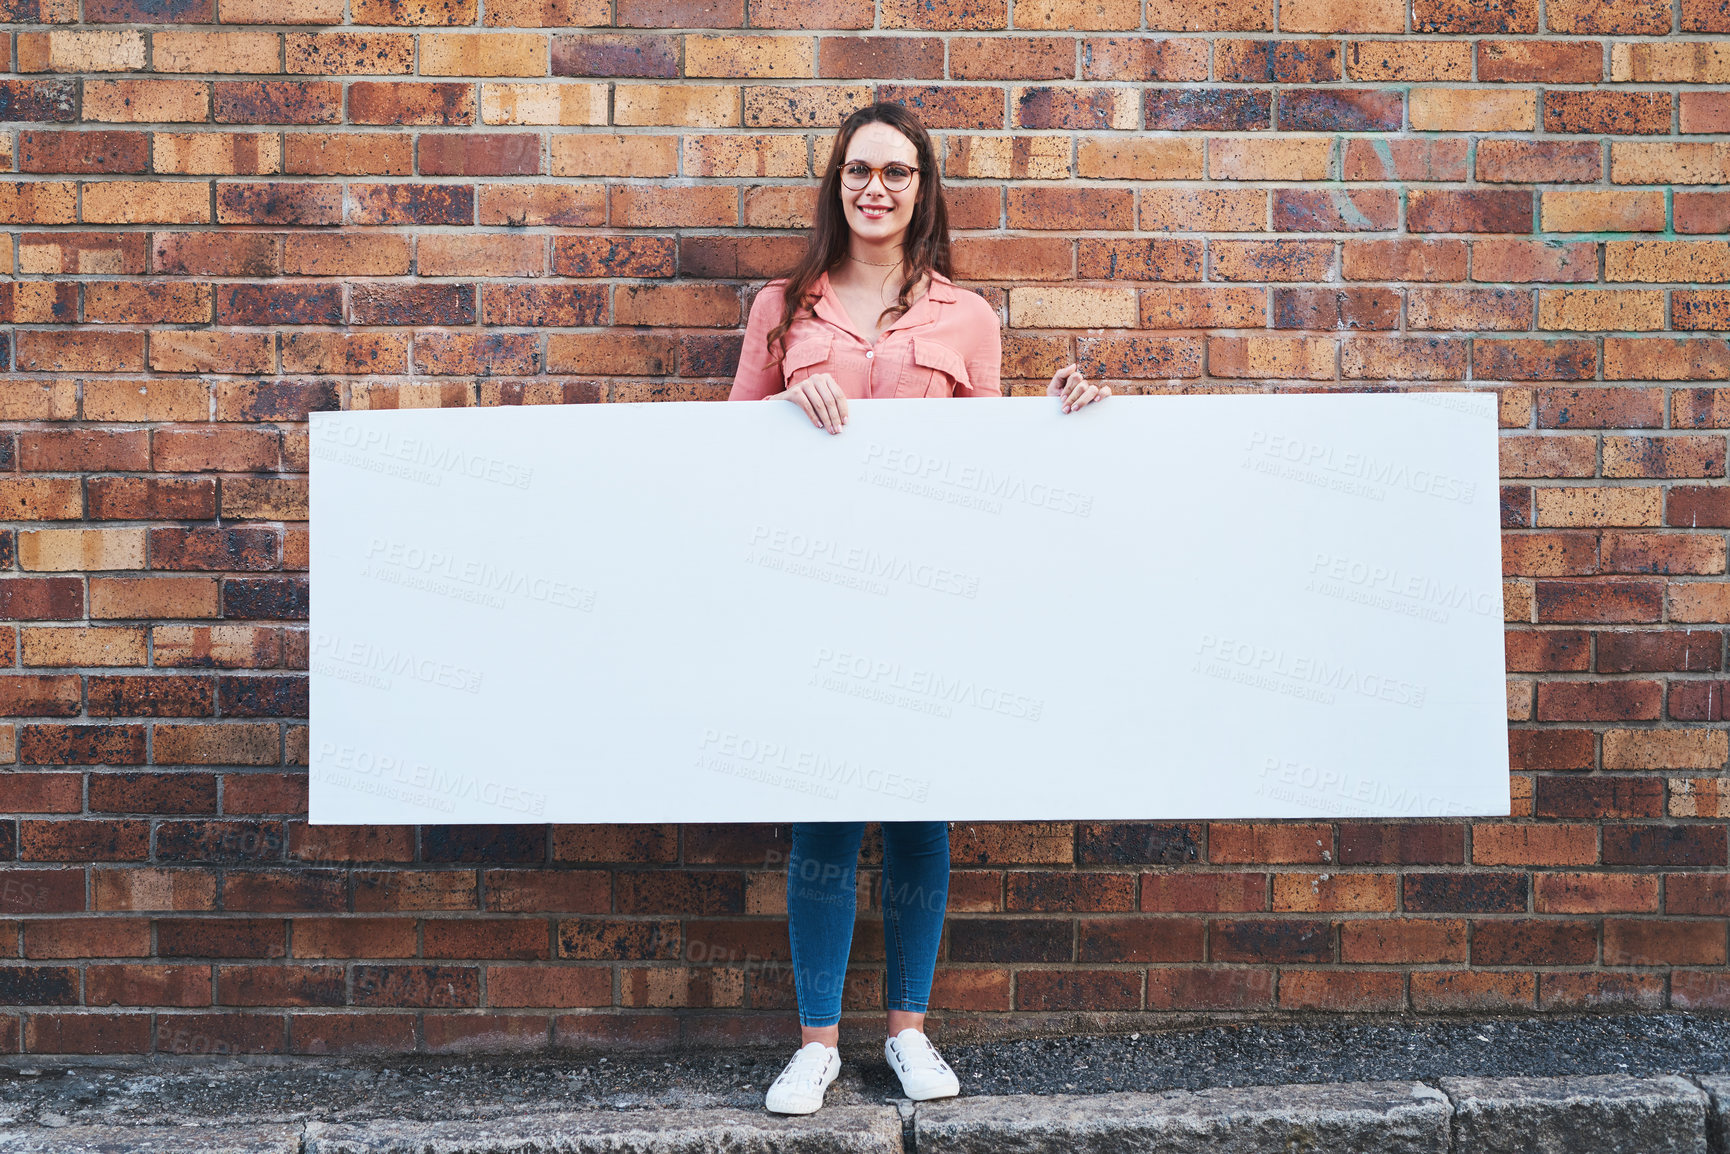 Buy stock photo Shot of a young woman holding a blank banner against an urban background outdoors